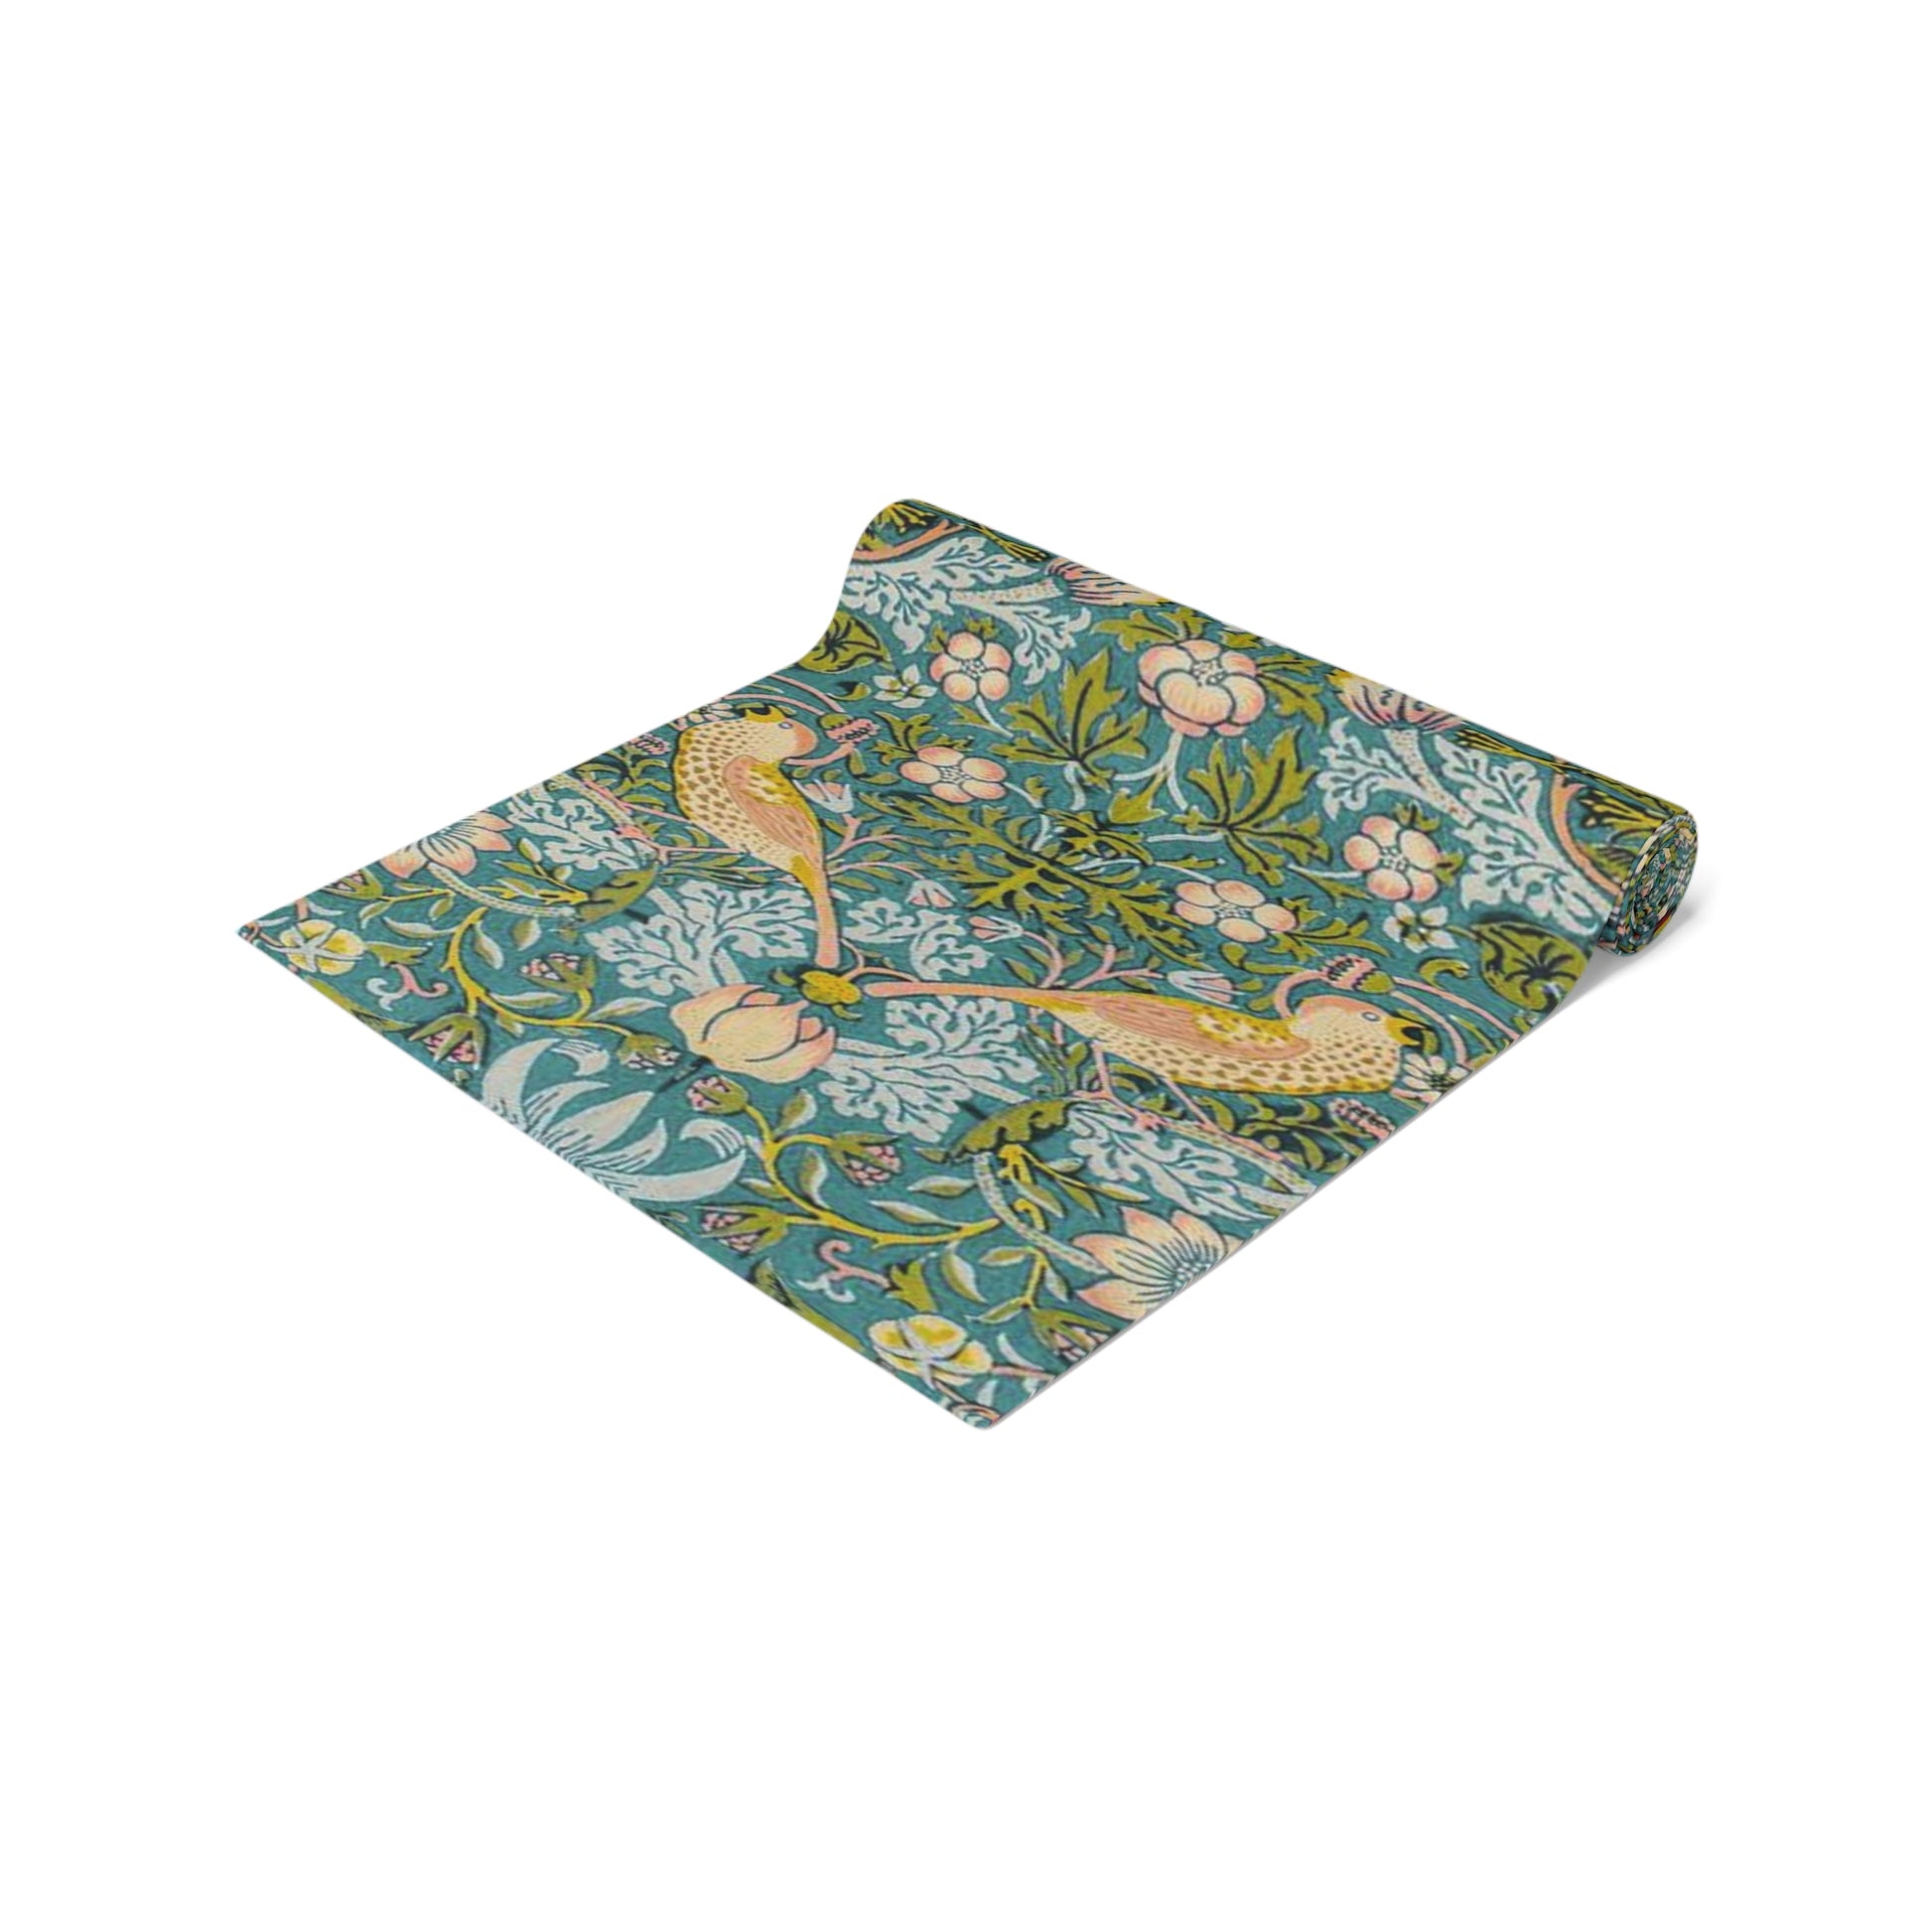 william-morris-co-table-runner-strawberry-thief-collection-duck-egg-blue-19